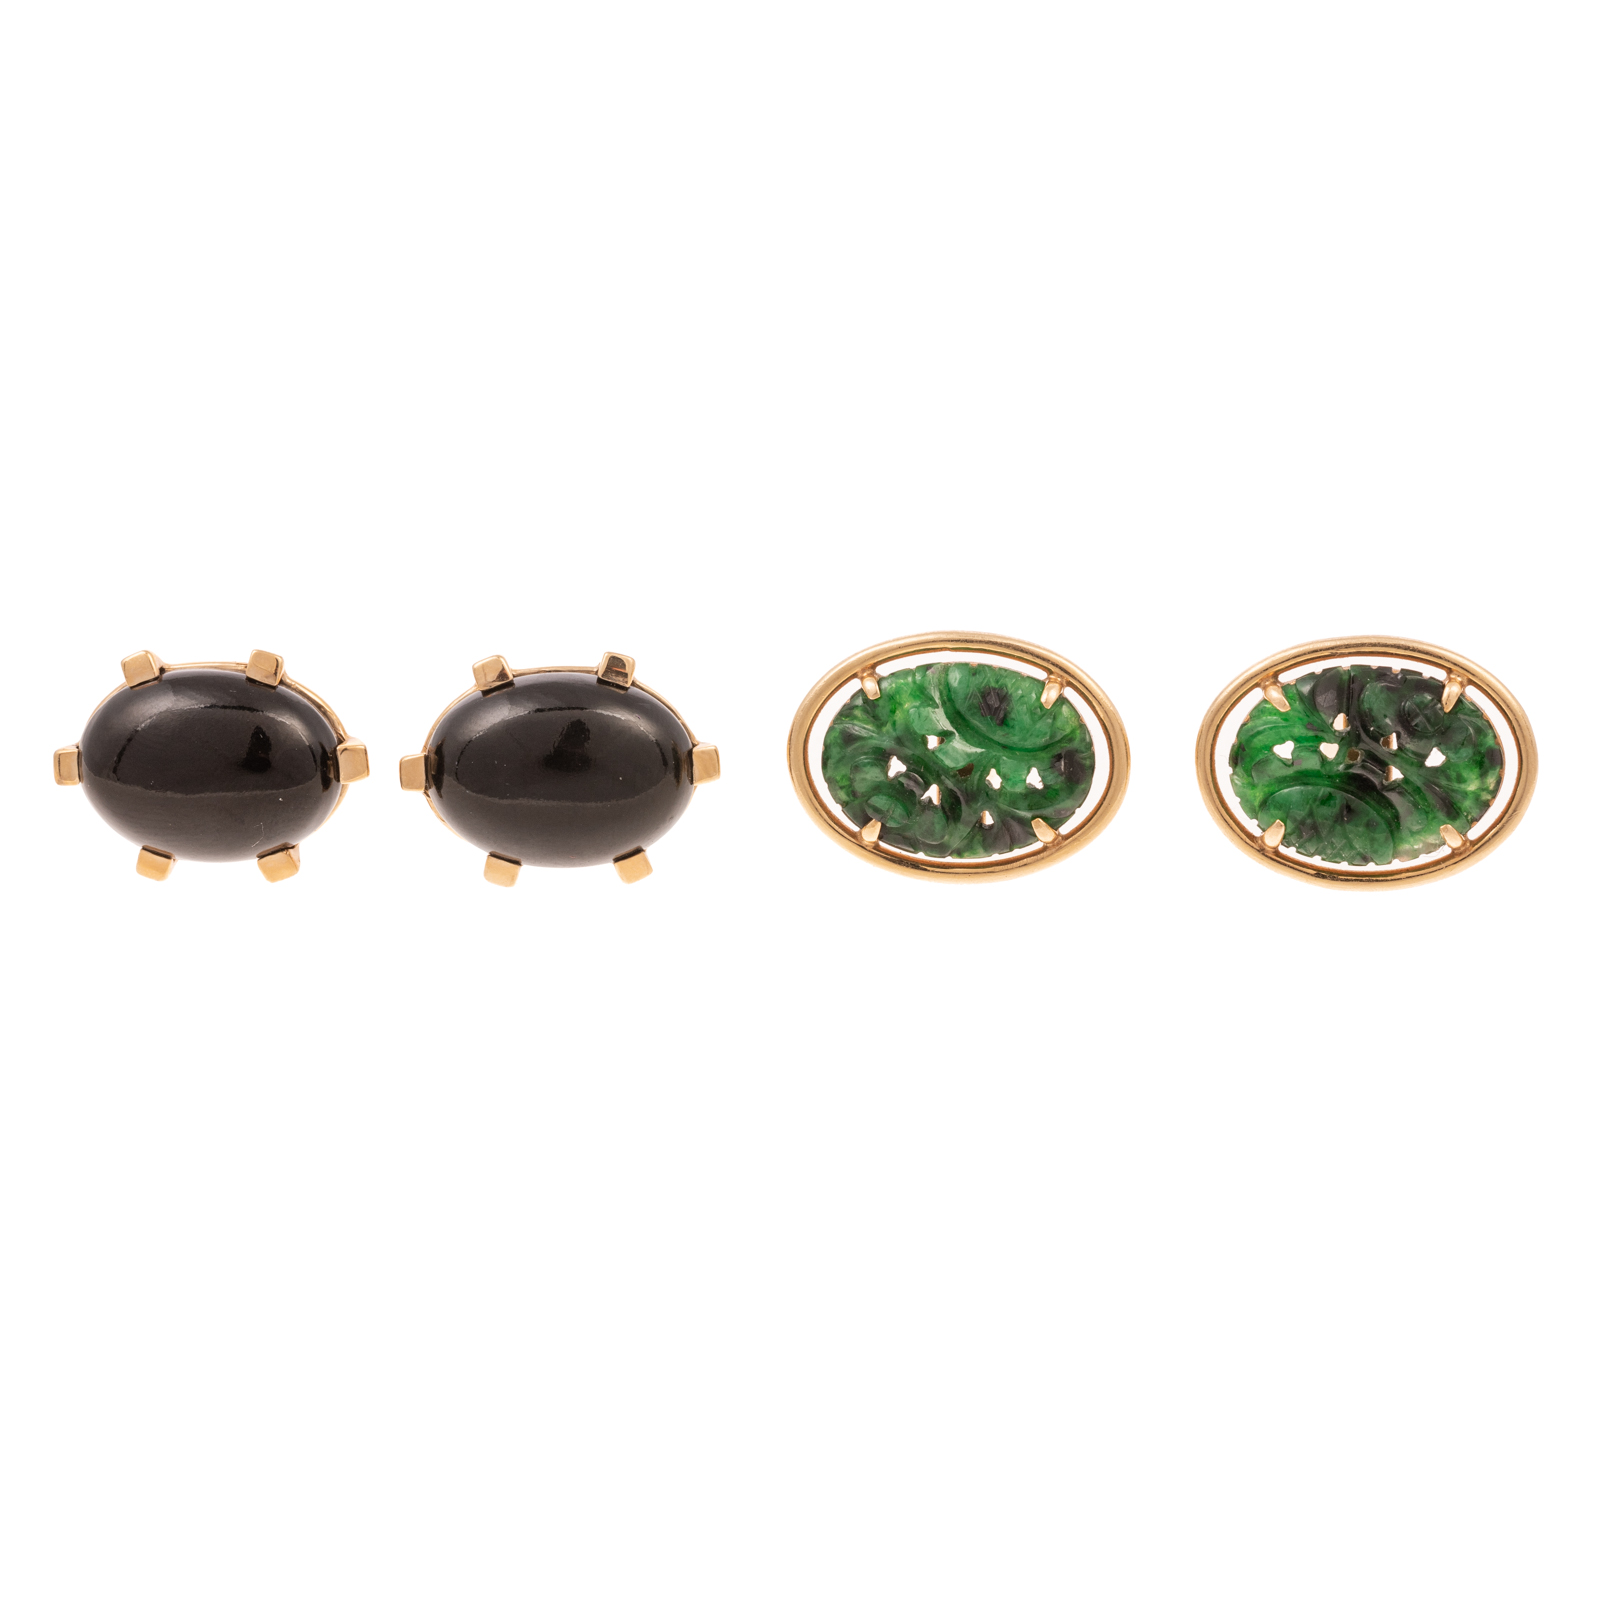 TWO PAIRS OF 14K CUFFLINKS IN ONYX 2e9f7d